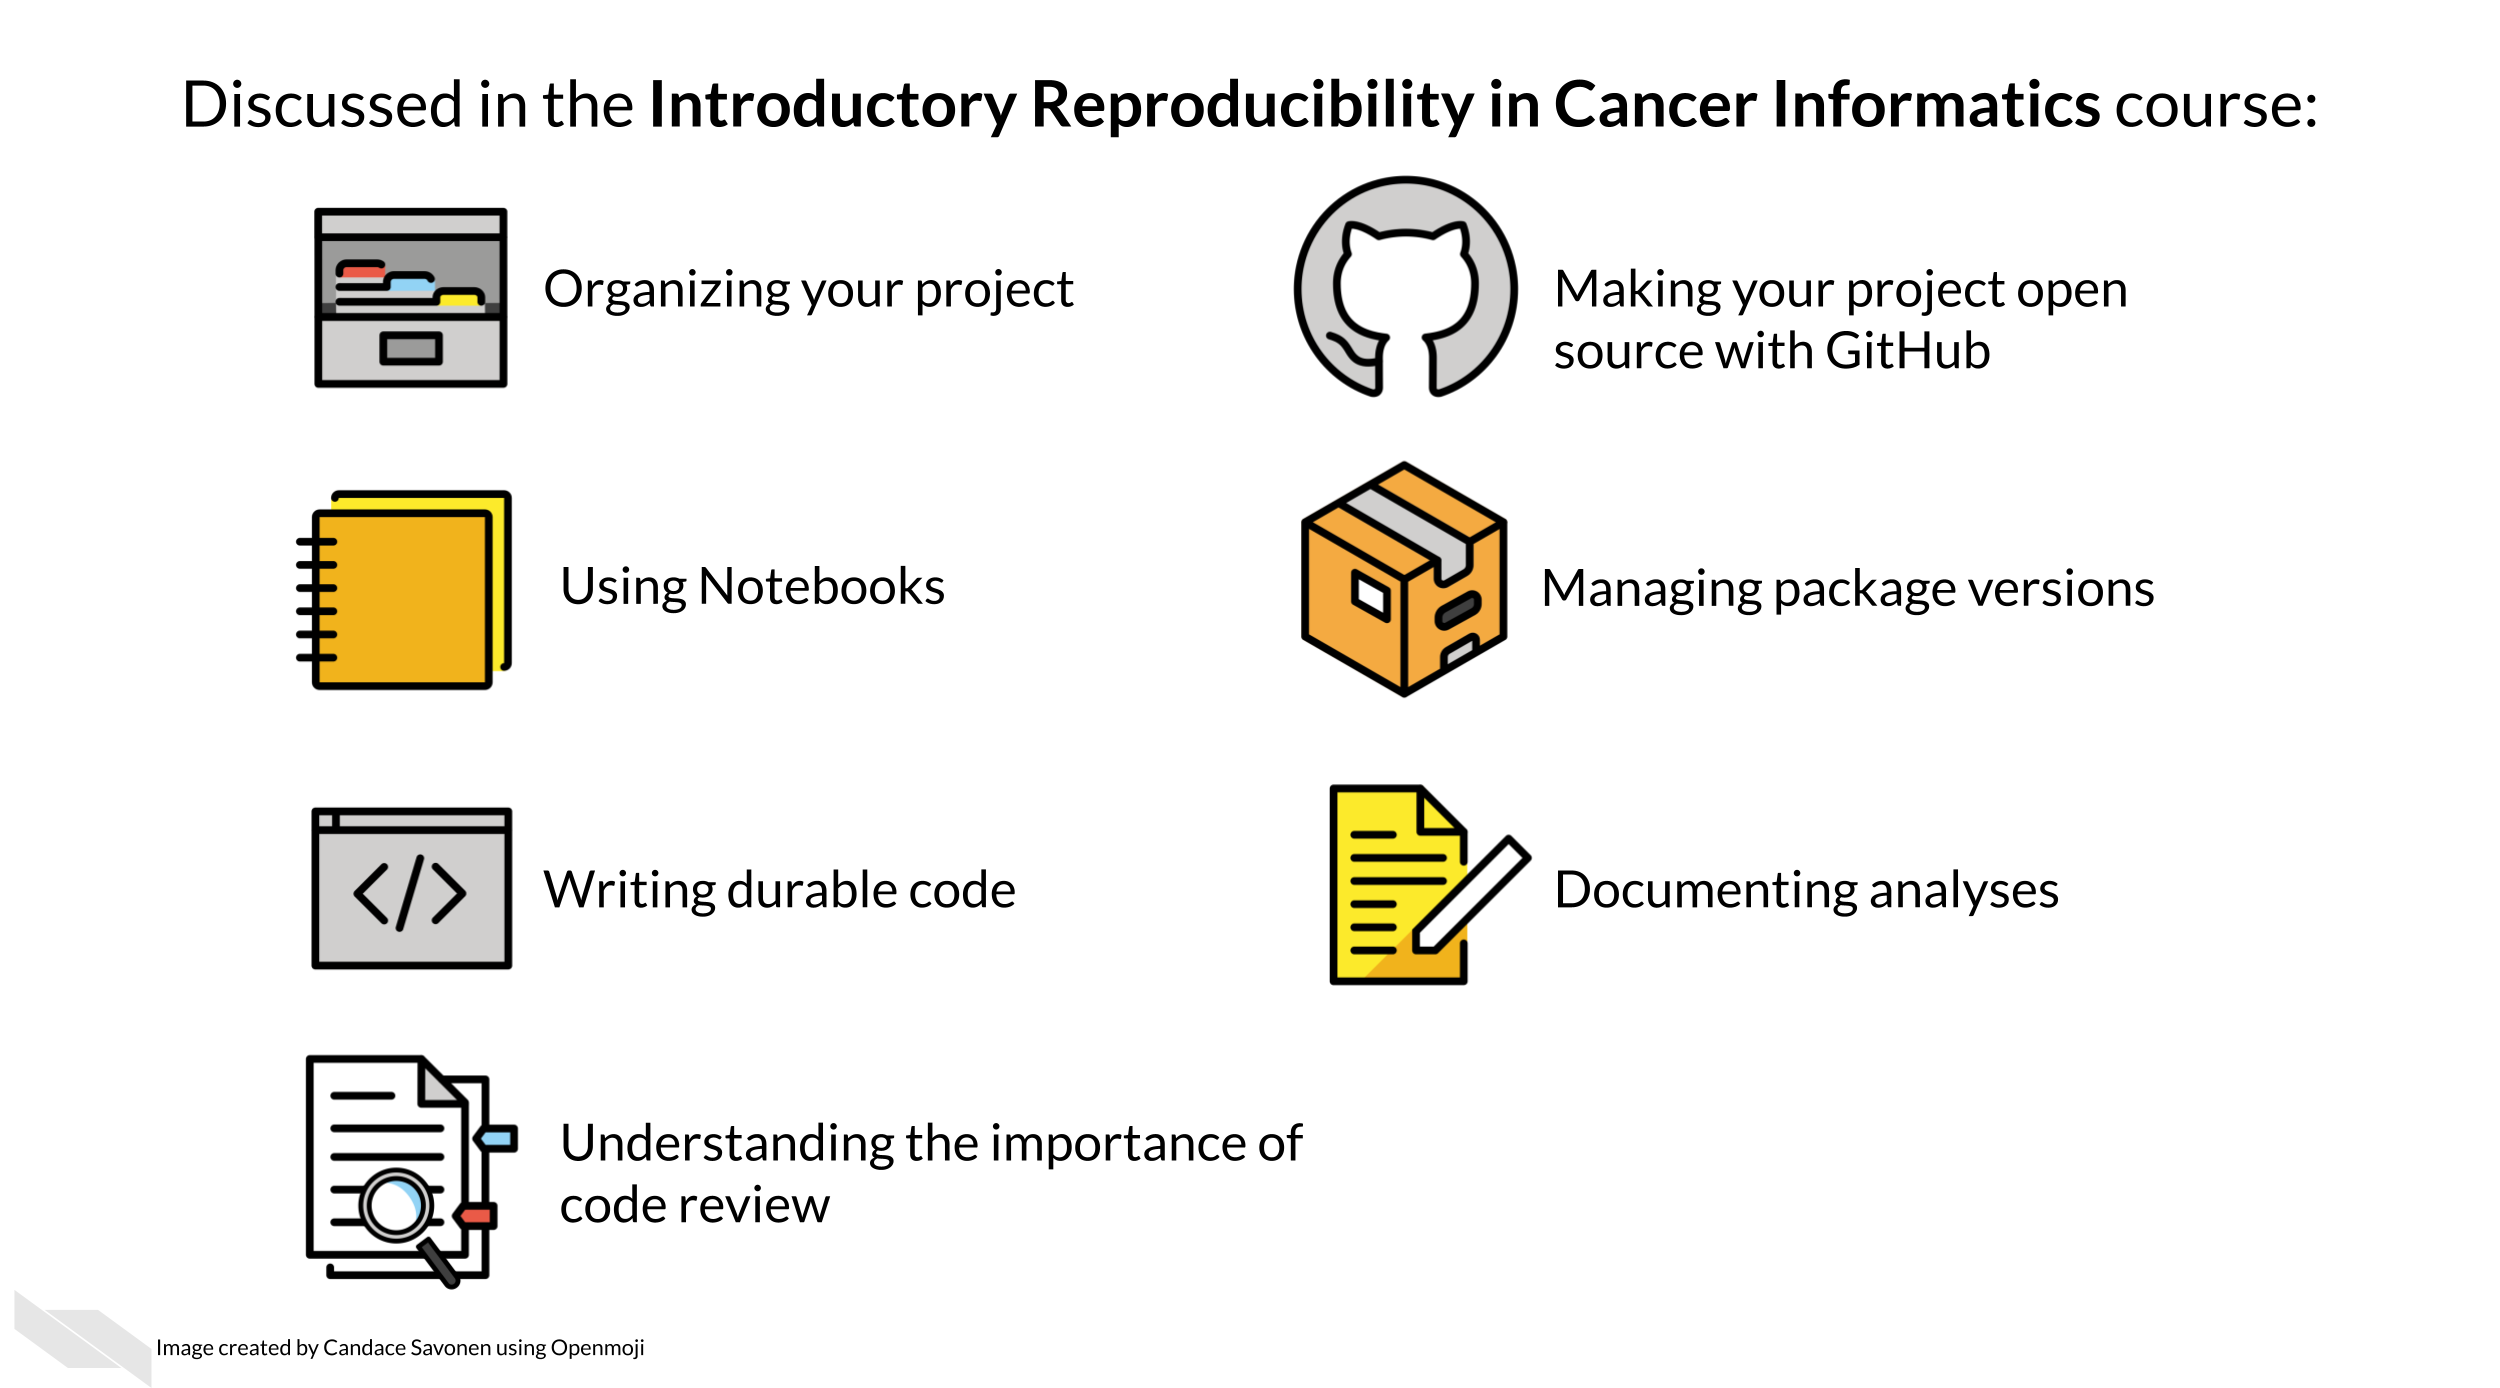 Discussed in the Introductory Reproducibility in Cancer Informatics course: Organizing your project, using notebooks, Making your project open source with GitHub, using notebooks, managing package versions, writing durable code, documenting analyses, understanding the importance of code review.